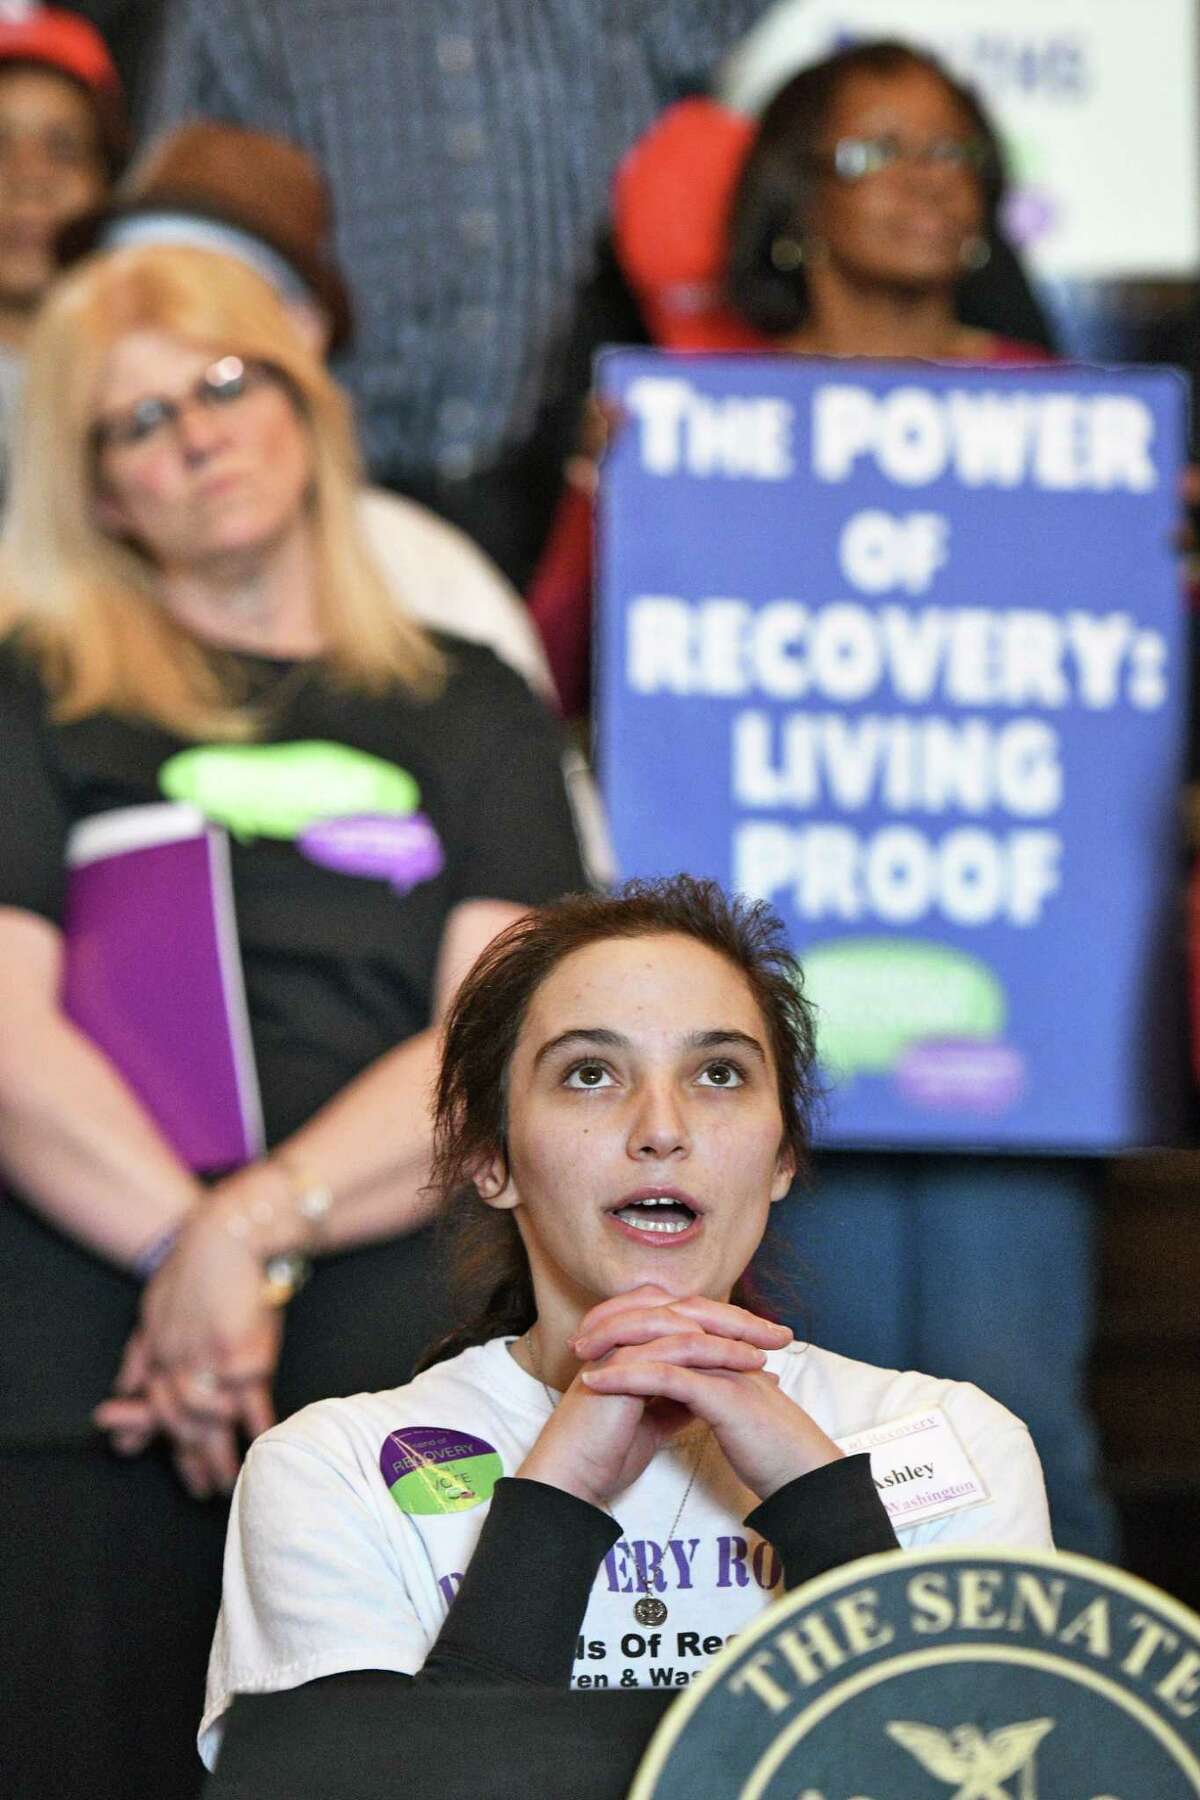 Ashley Livingston of Glens Falls, a young person in sustained recovery, speaks during a news conference by advocates for addiction recovery at the Capitol Tuesday Feb. 28, 2017 in Albany, NY. (John Carl D'Annibale / Times Union)